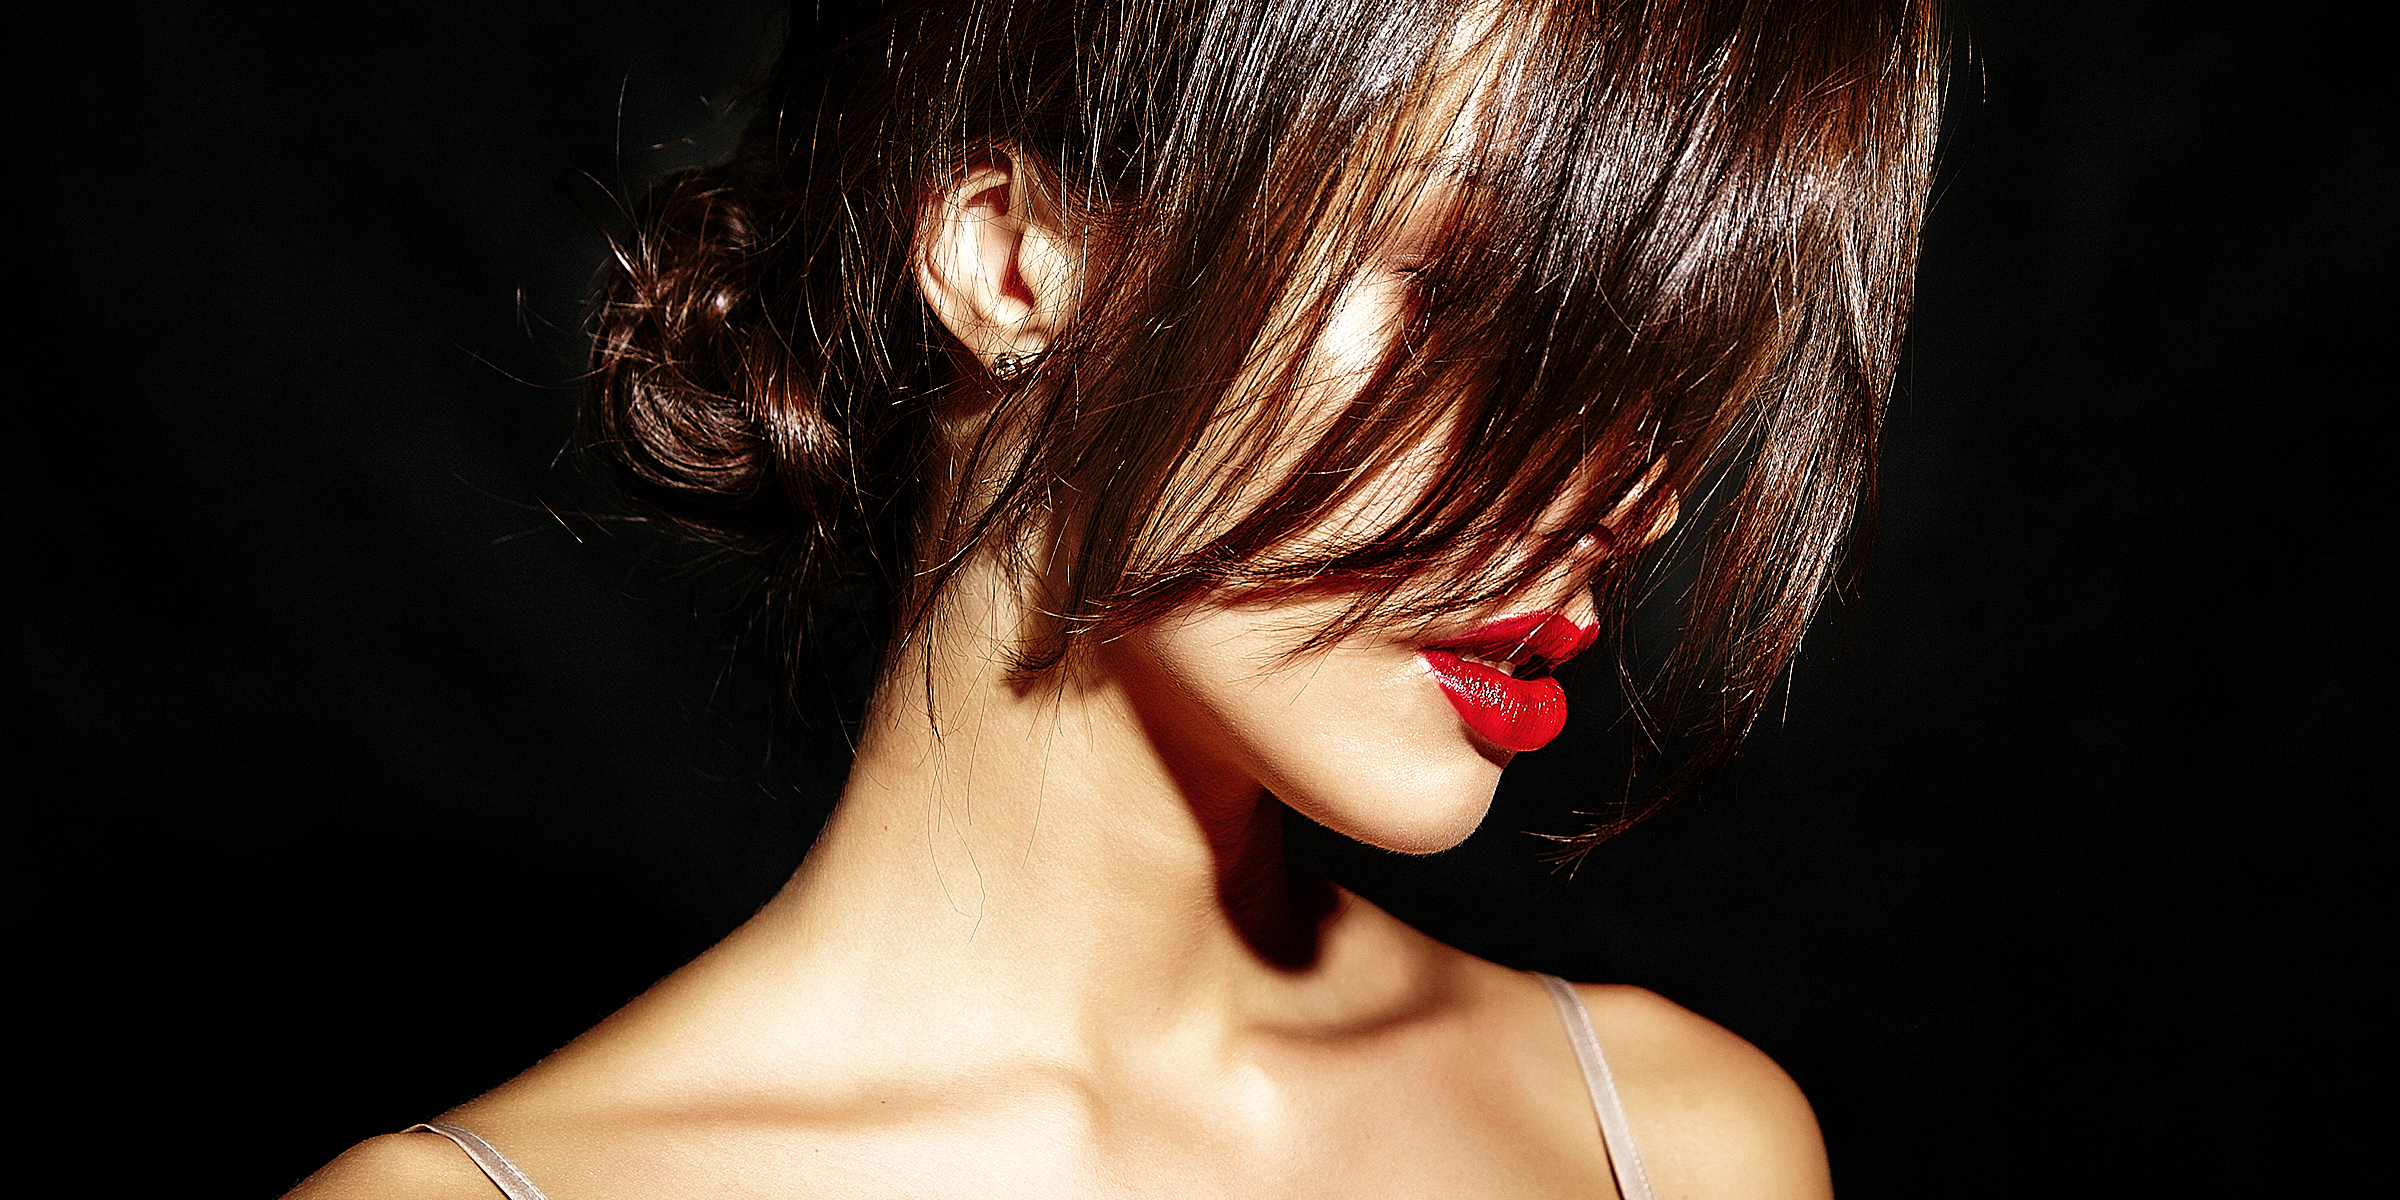 A woman with glossy red lips | Source: Freepik